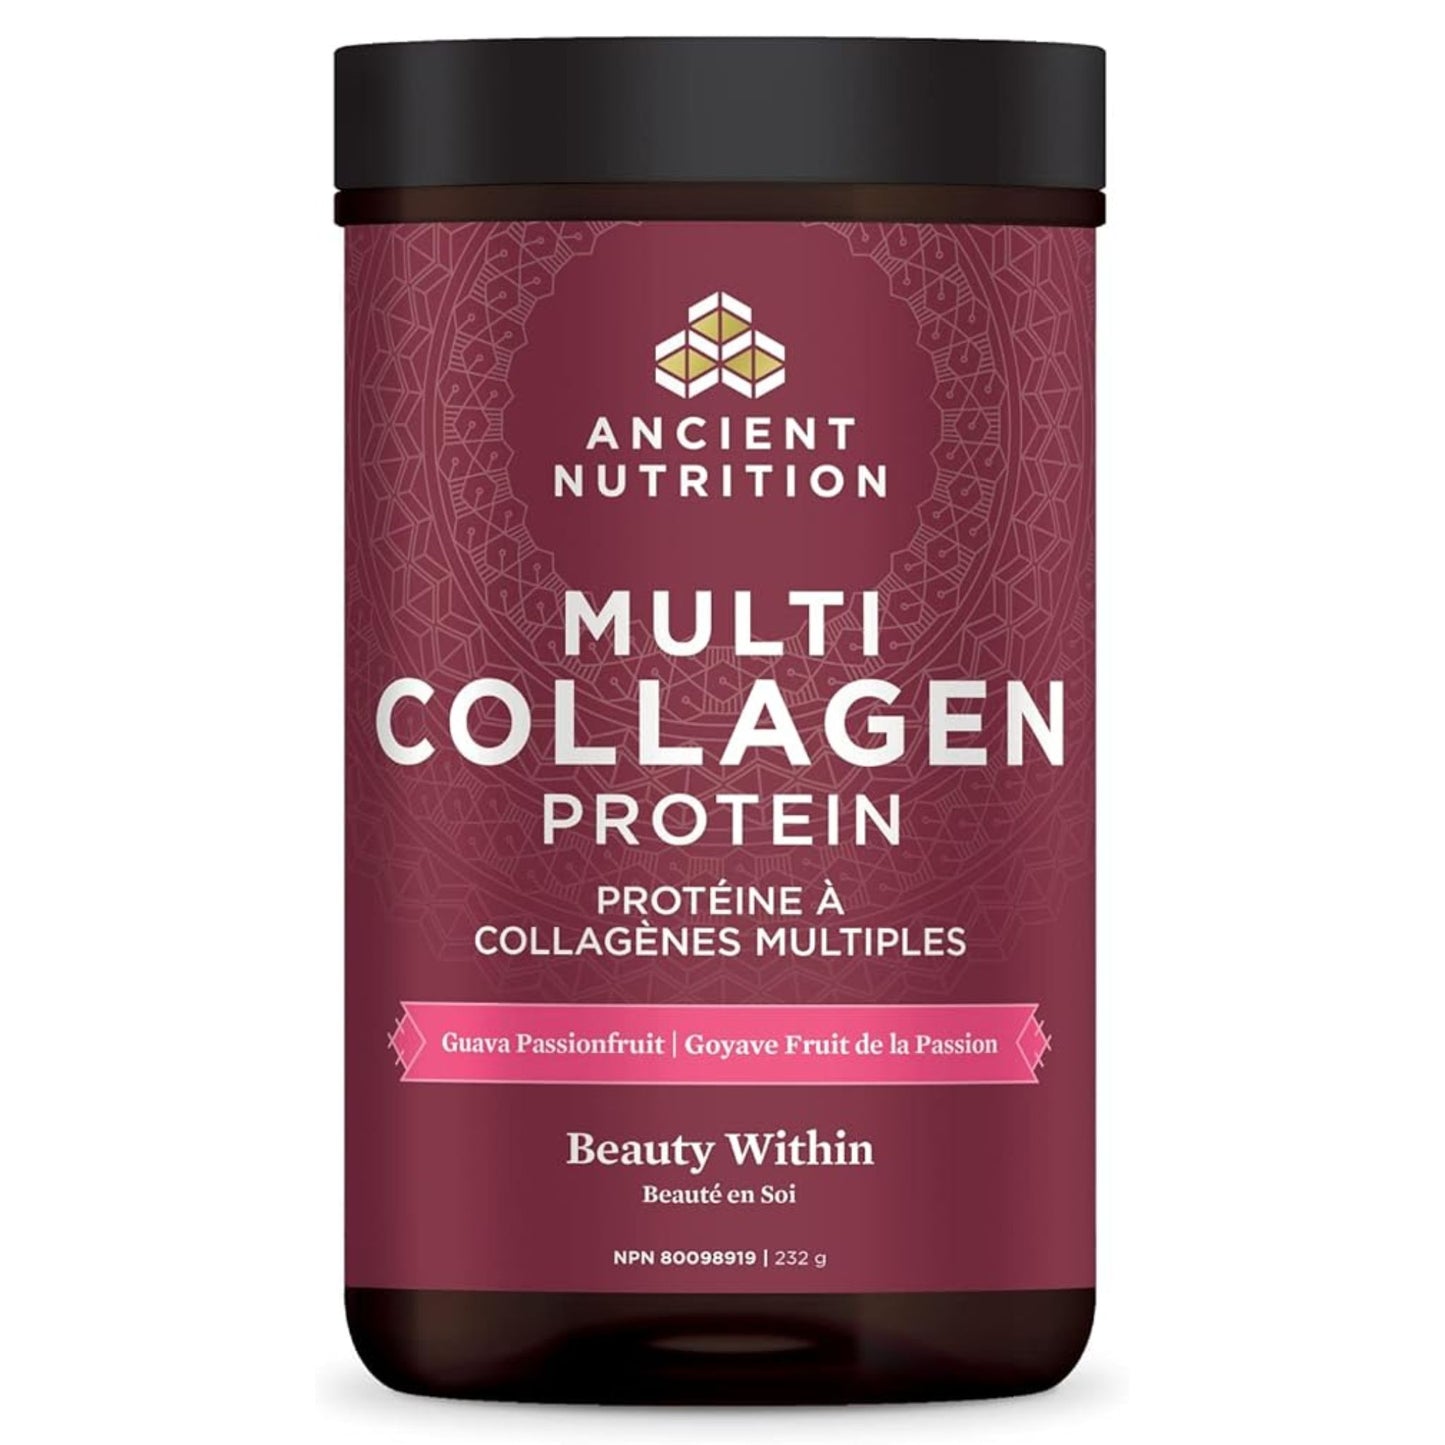 Ancient Nutrition Multi Collagen Protein Beauty Within, 232g